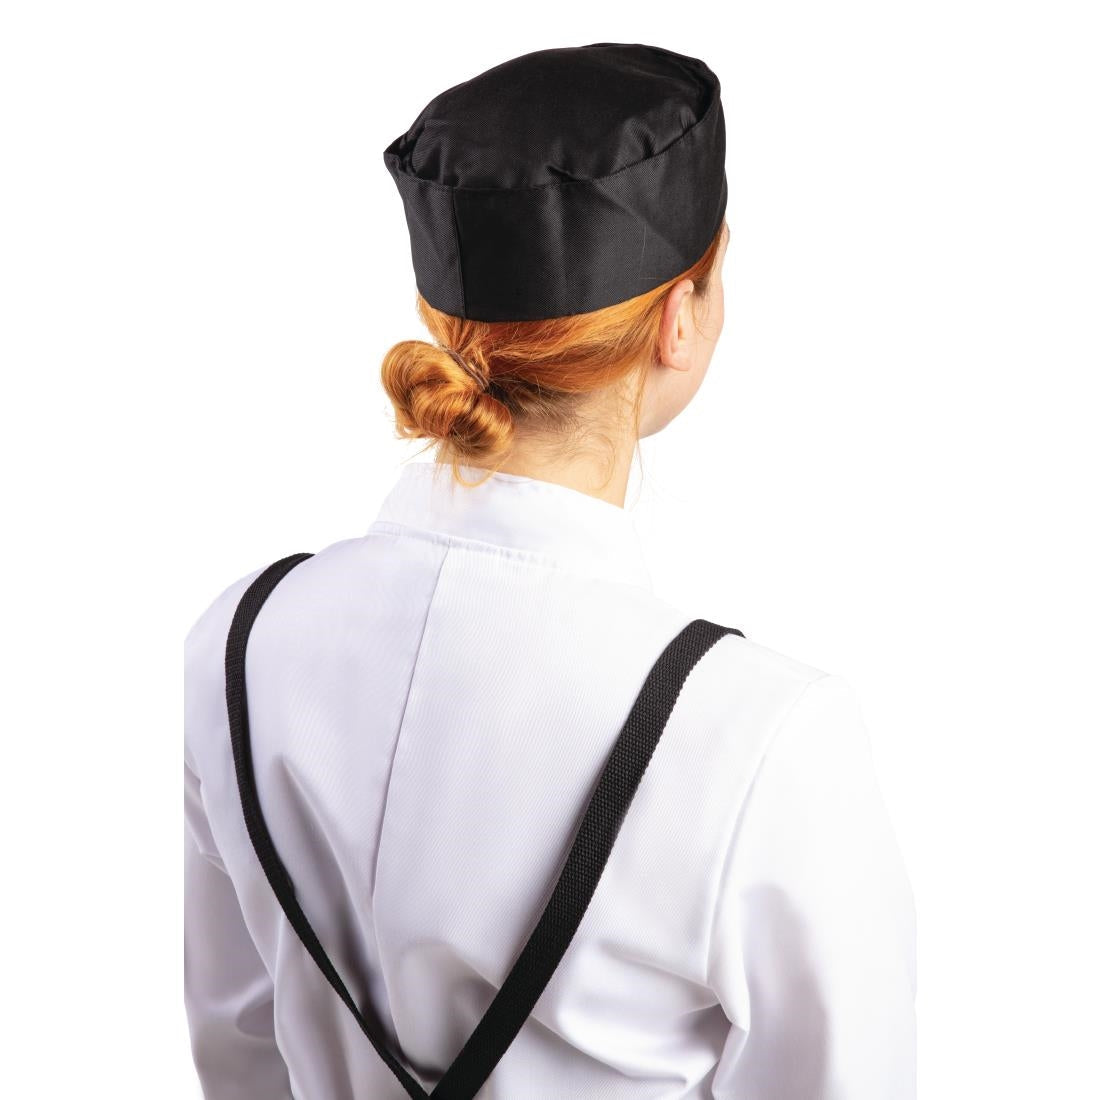 A206-S Whites Chef Skull Cap Polycotton Black - S JD Catering Equipment Solutions Ltd